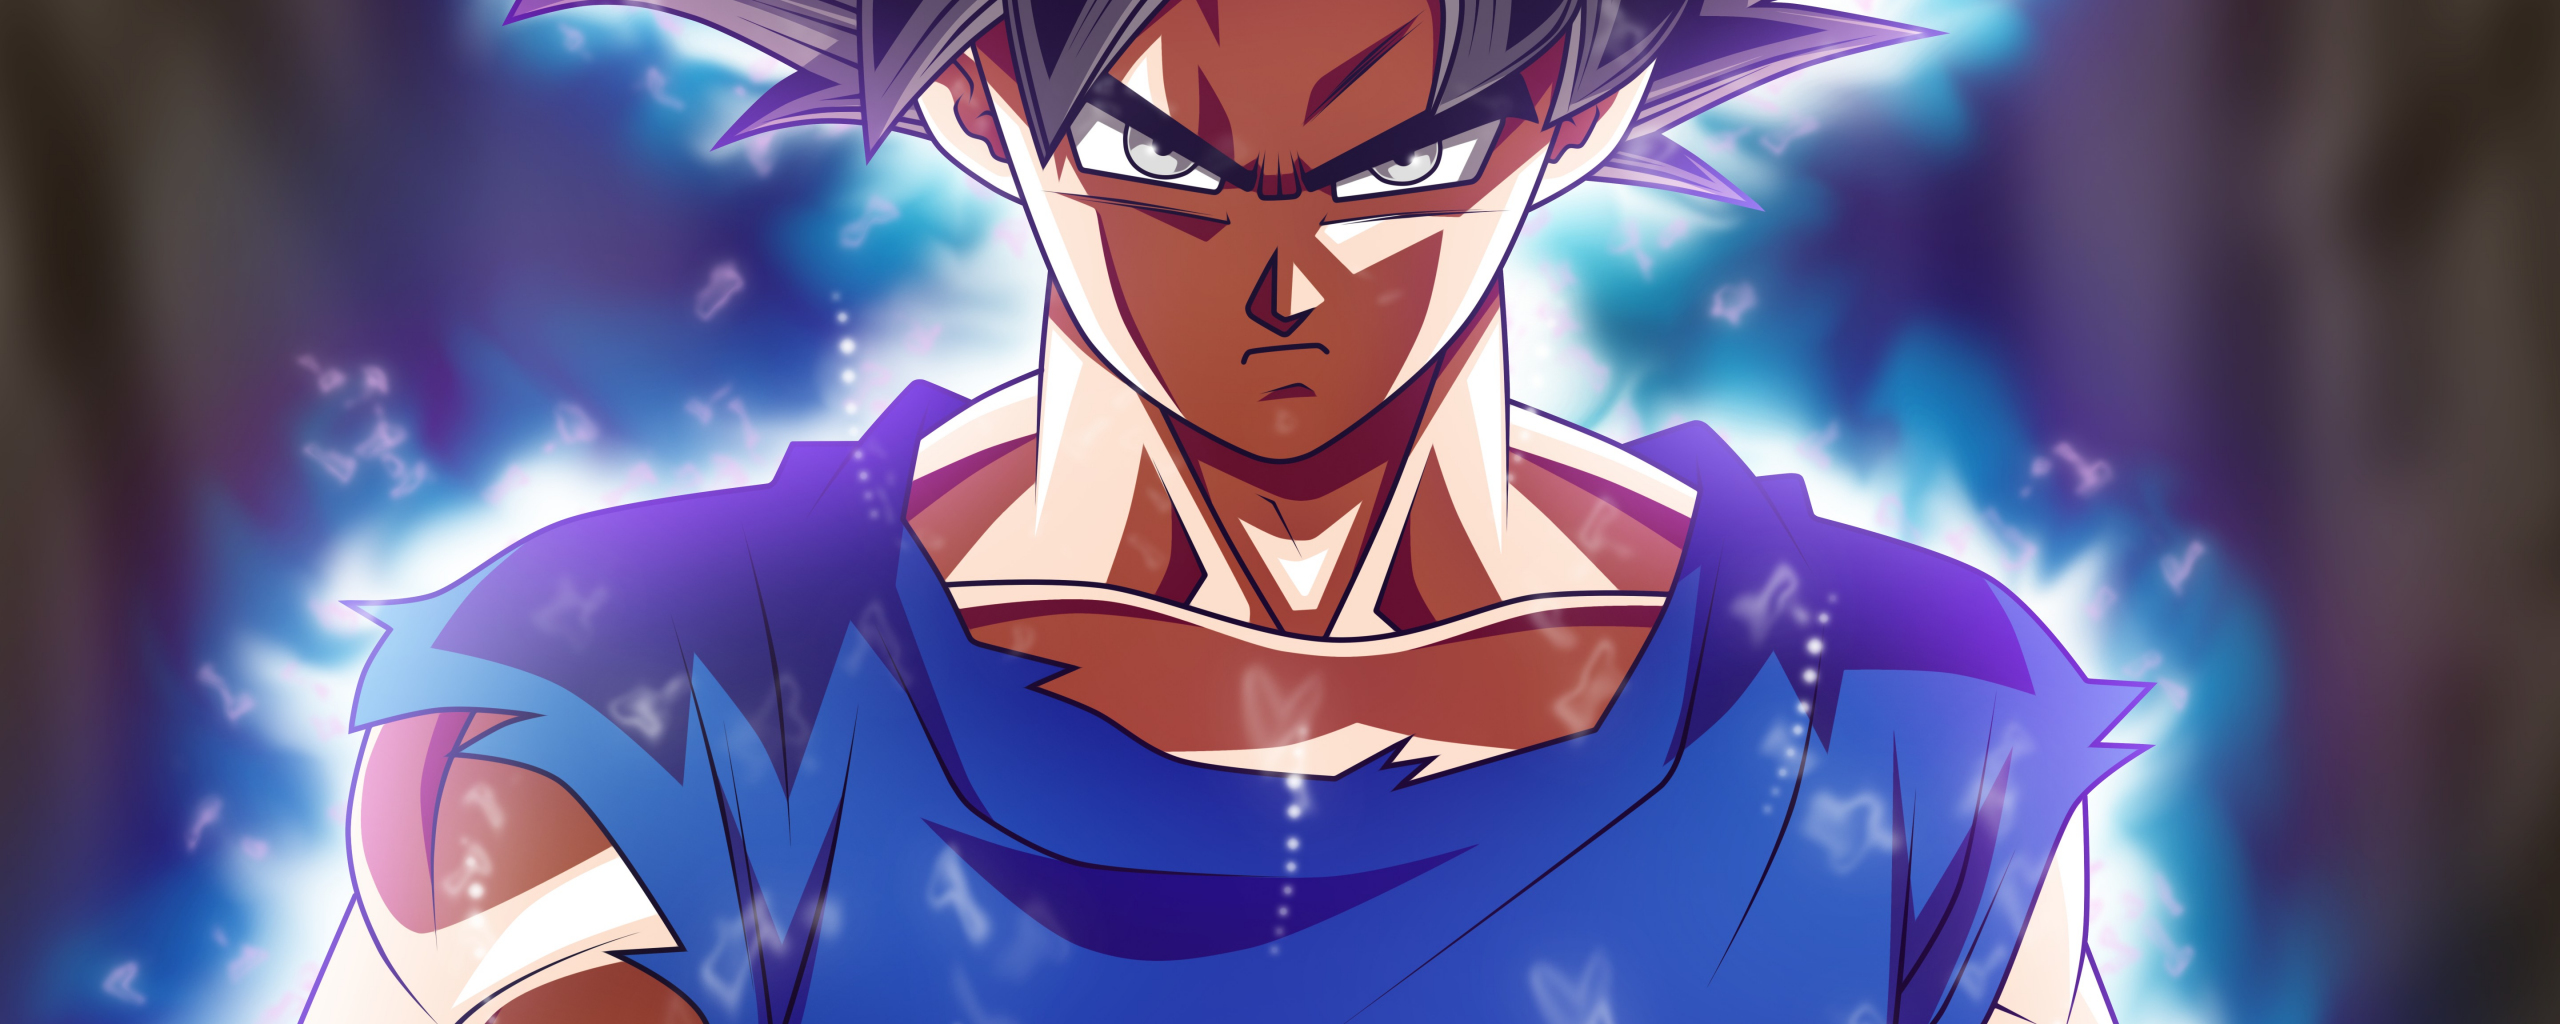 Desktop Wallpaper Angry Super Goku Dragon Ball Z 5k Hd Image Picture Background 24cae9